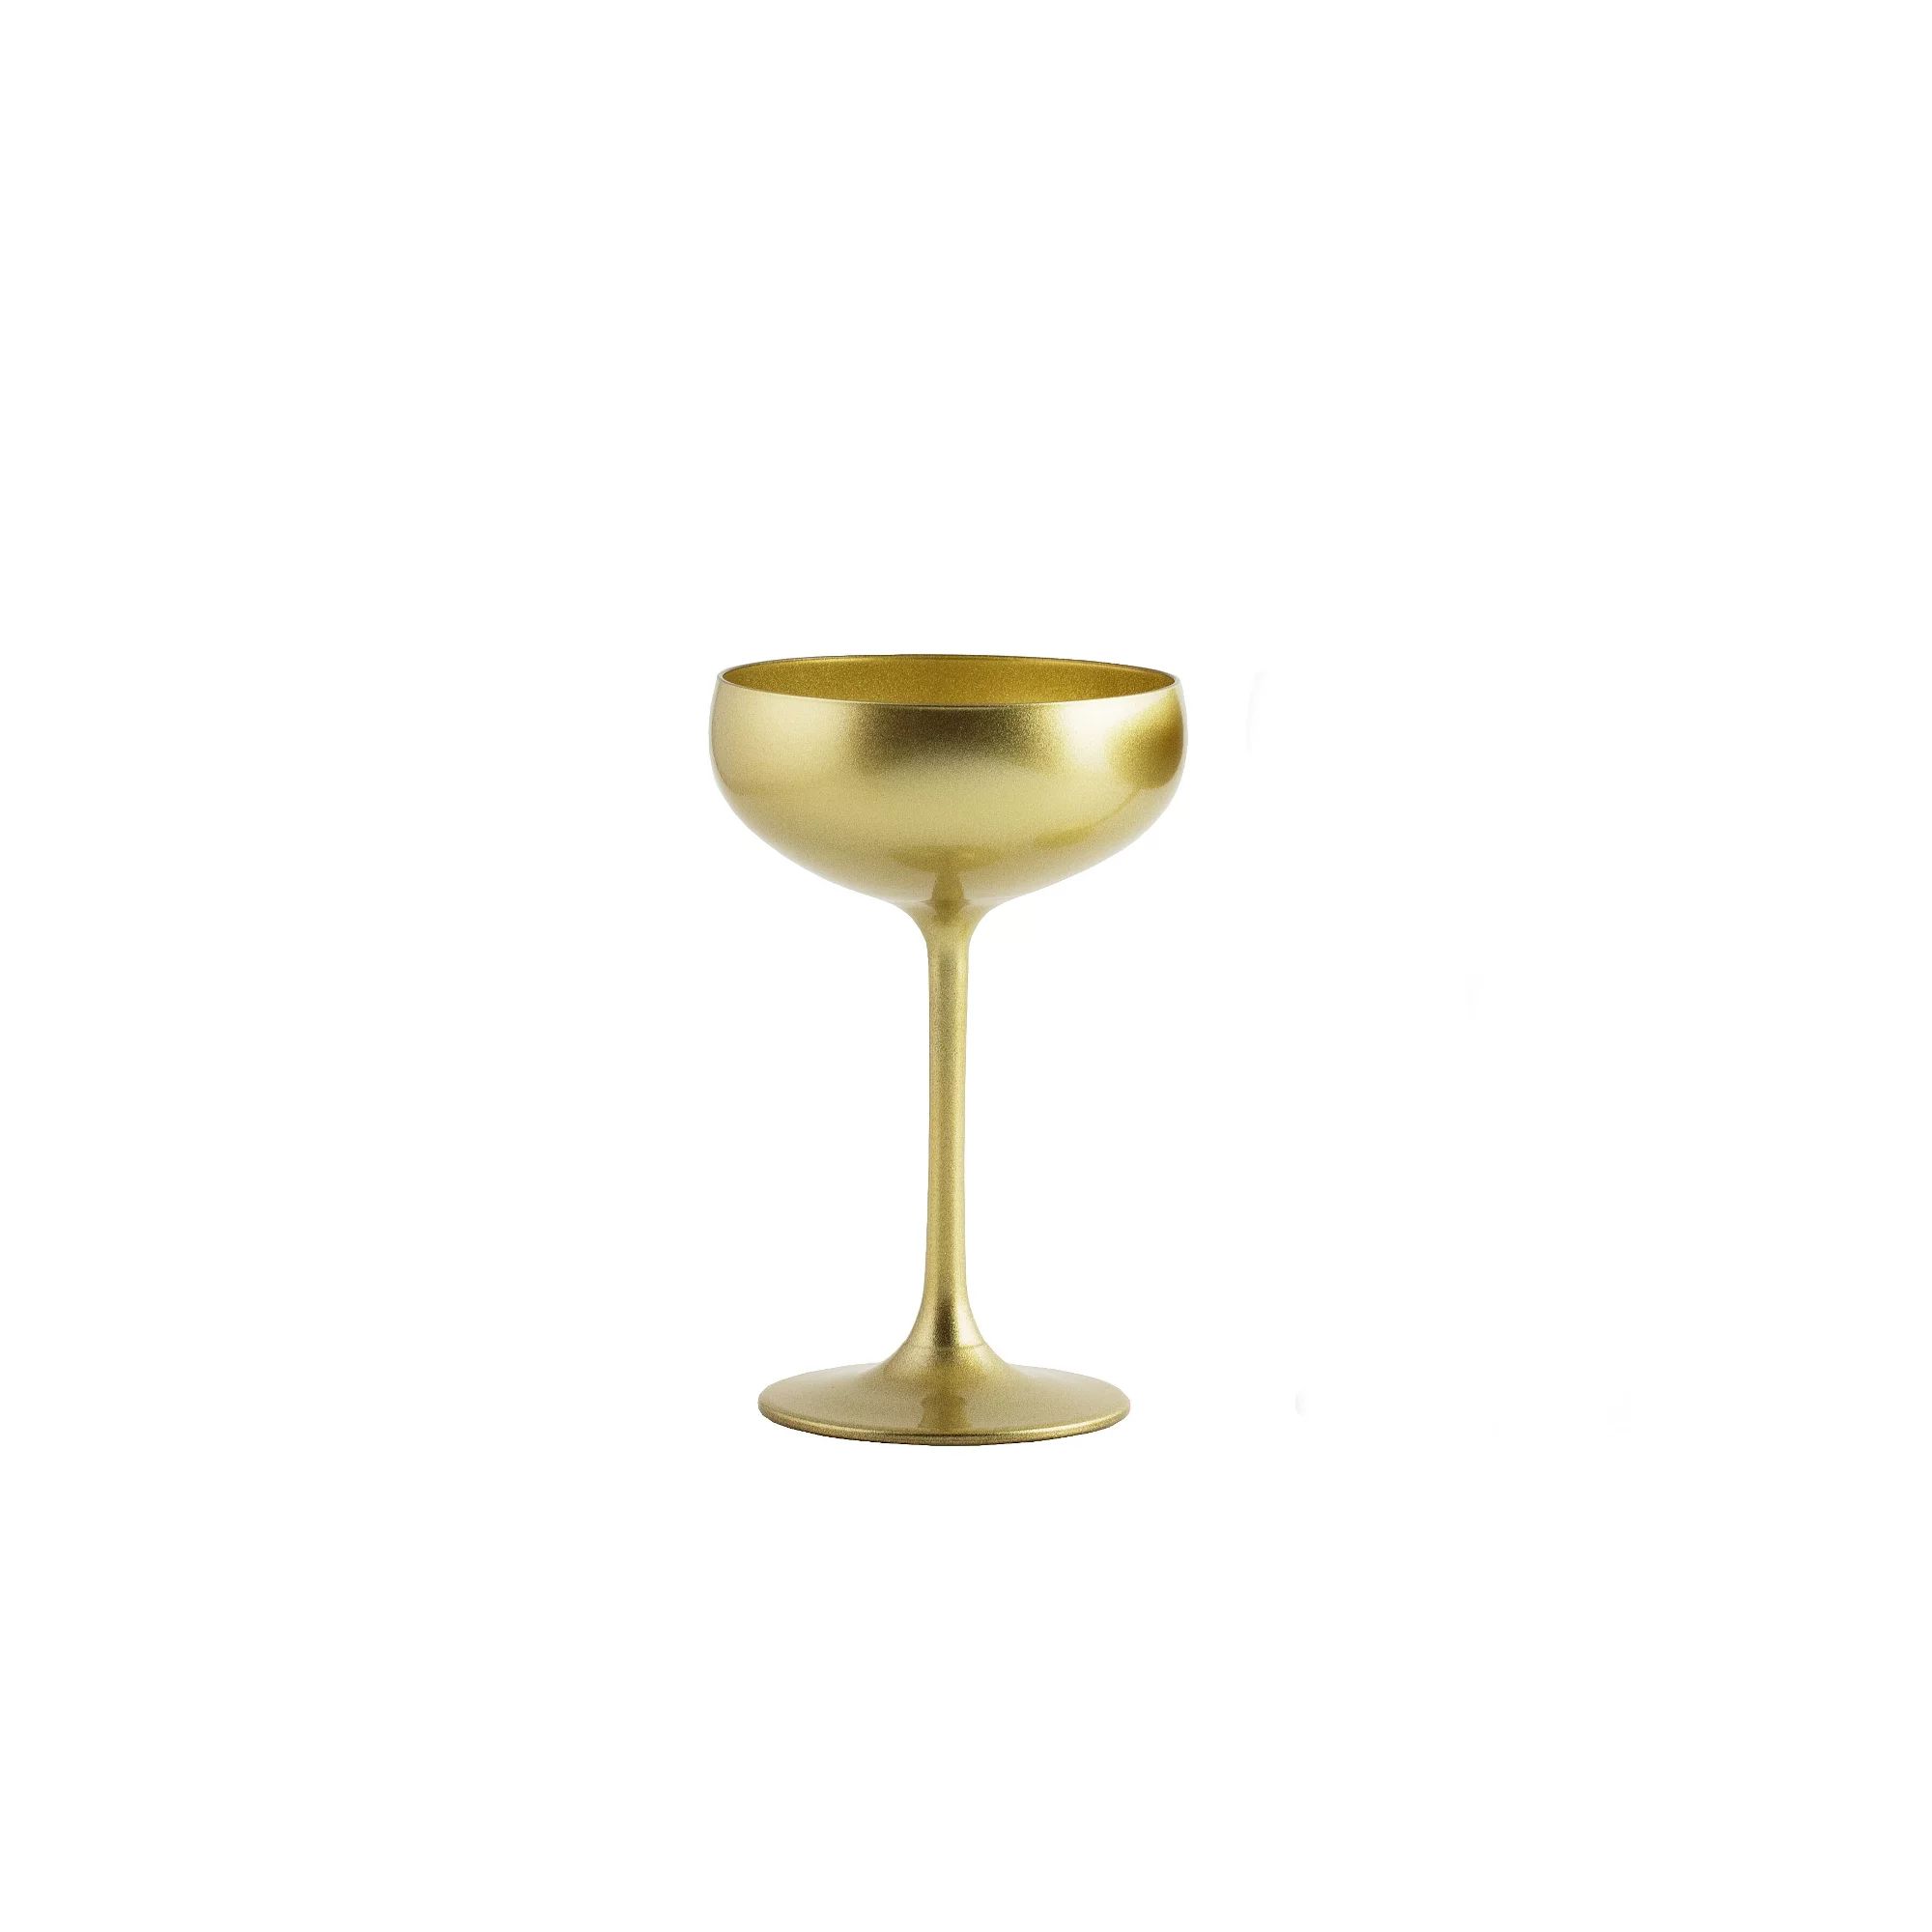 Stolzle Lausitz Olympia Gold German Made Champagne Saucer Coupe Glass, Set of 6 | Walmart (US)